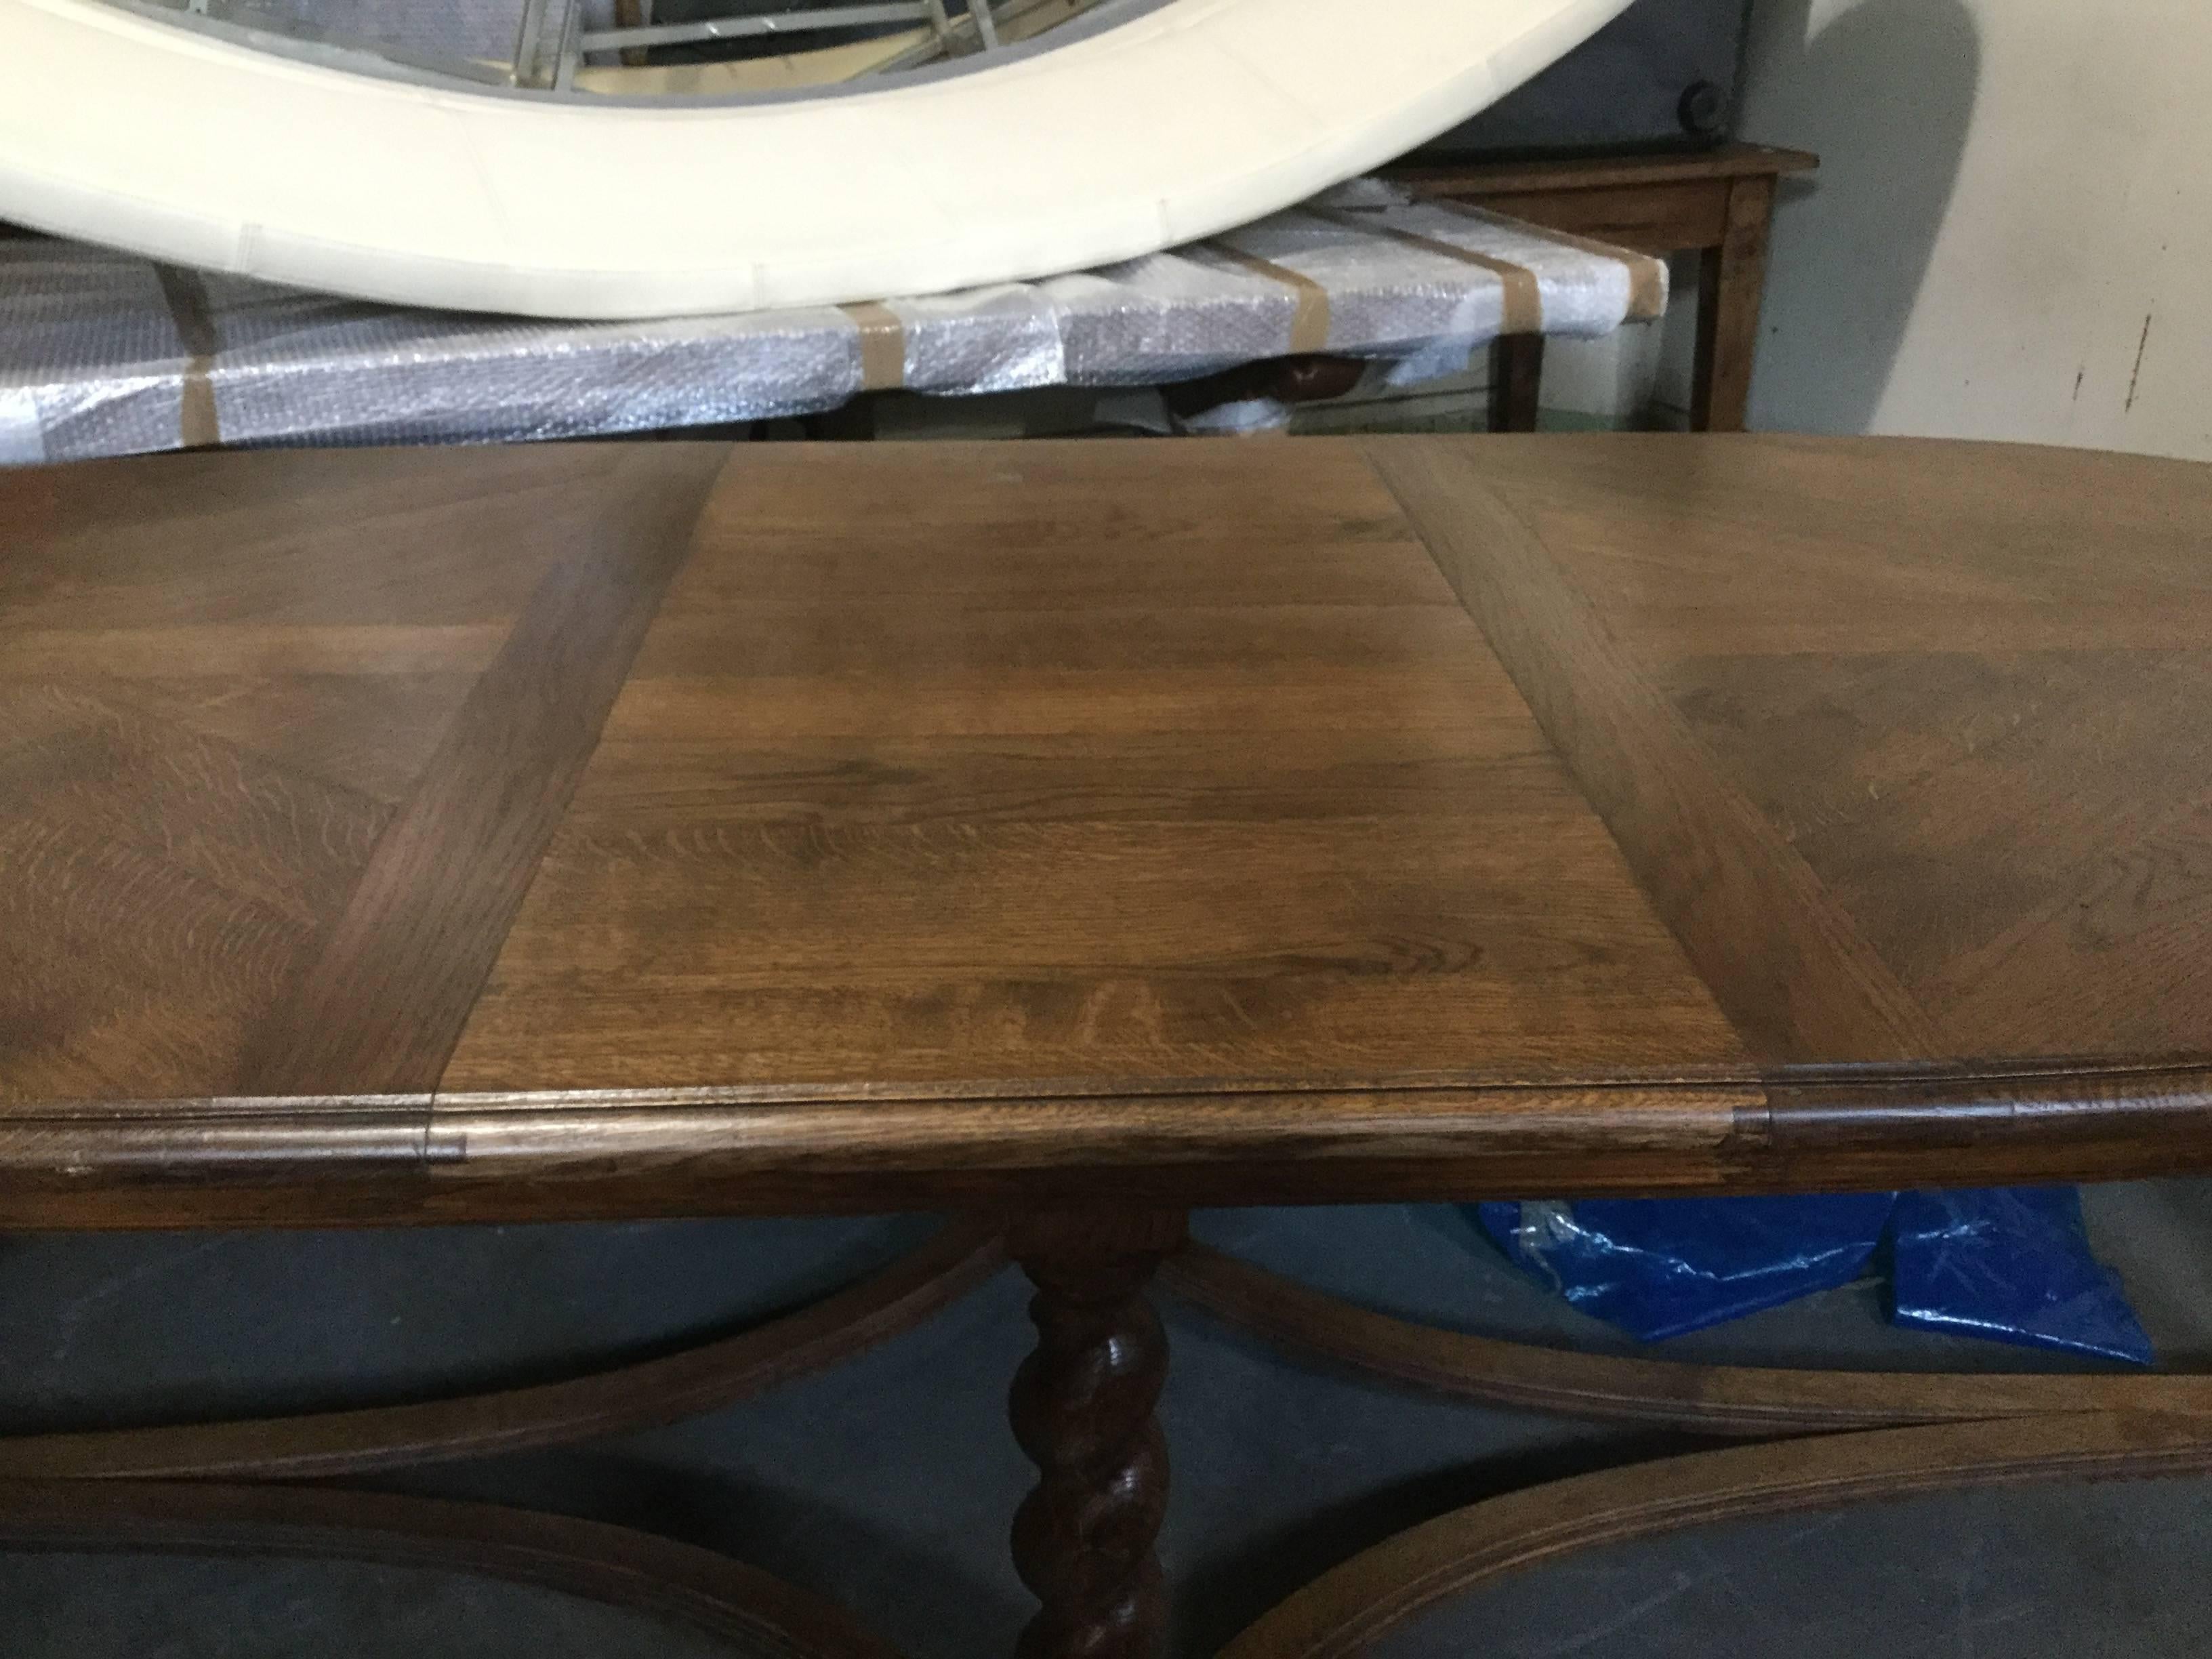 French antique oval dining table with barley twist legs. This large table features a beautiful parquet top over barley twist legs and can easily seat ten. Made of French oak, circa 1910.